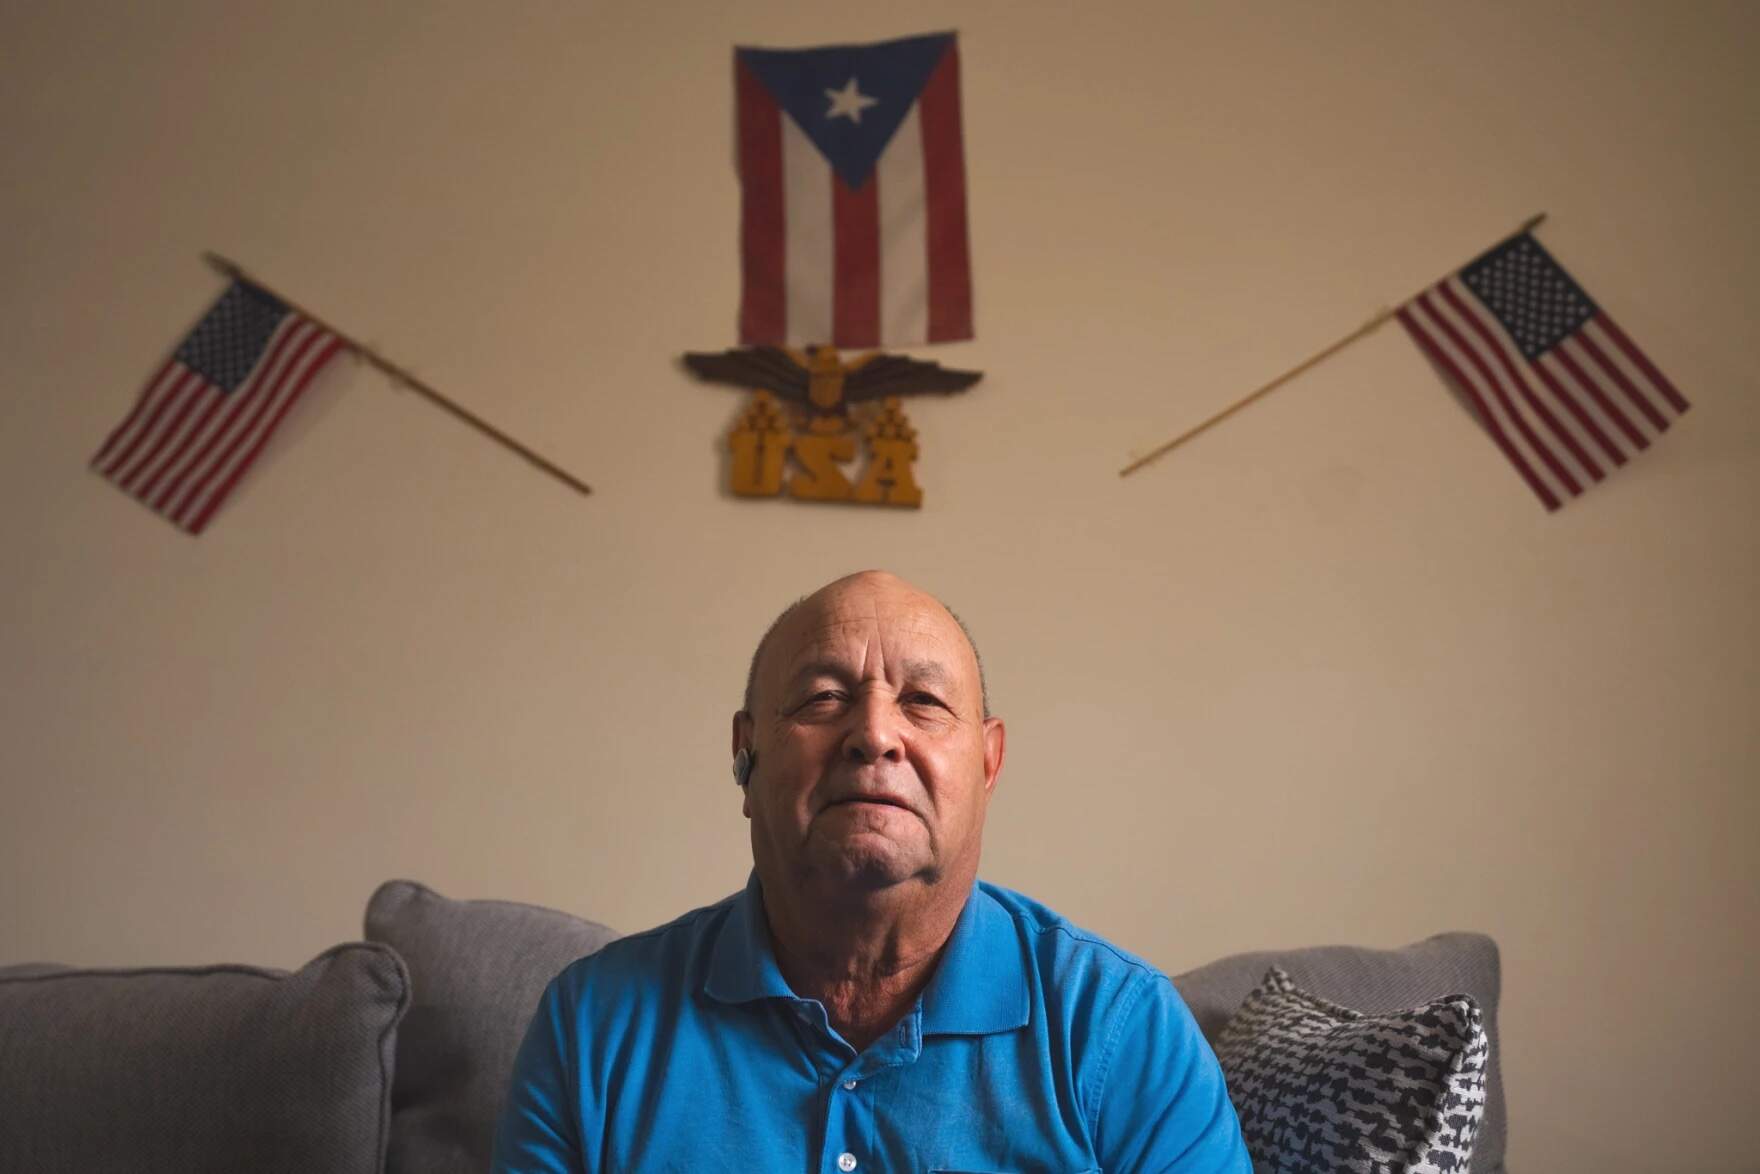 José Lugo is a Puerto Rican who lives in Manchester’s West side. He has been a conservative since he was 17 but disagrees on one thing with Republicans. “I am against guns, and I will never buy one,” he said. (Gabriela Lozada/NHPR)